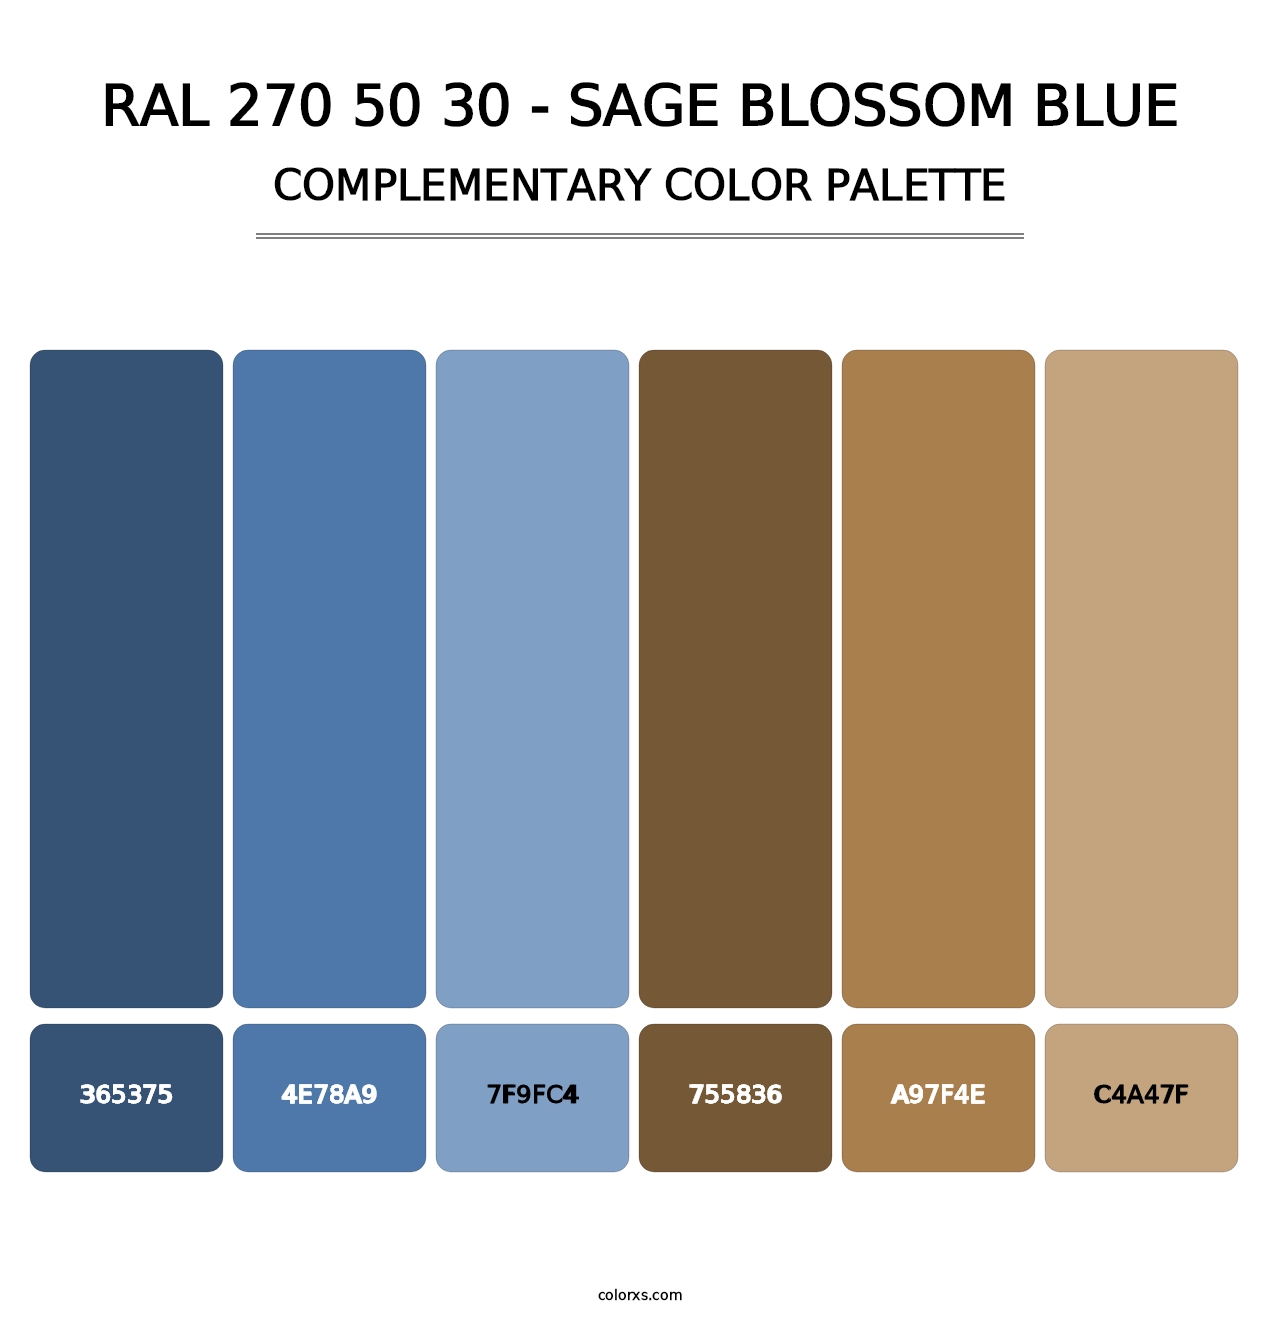 RAL 270 50 30 - Sage Blossom Blue - Complementary Color Palette